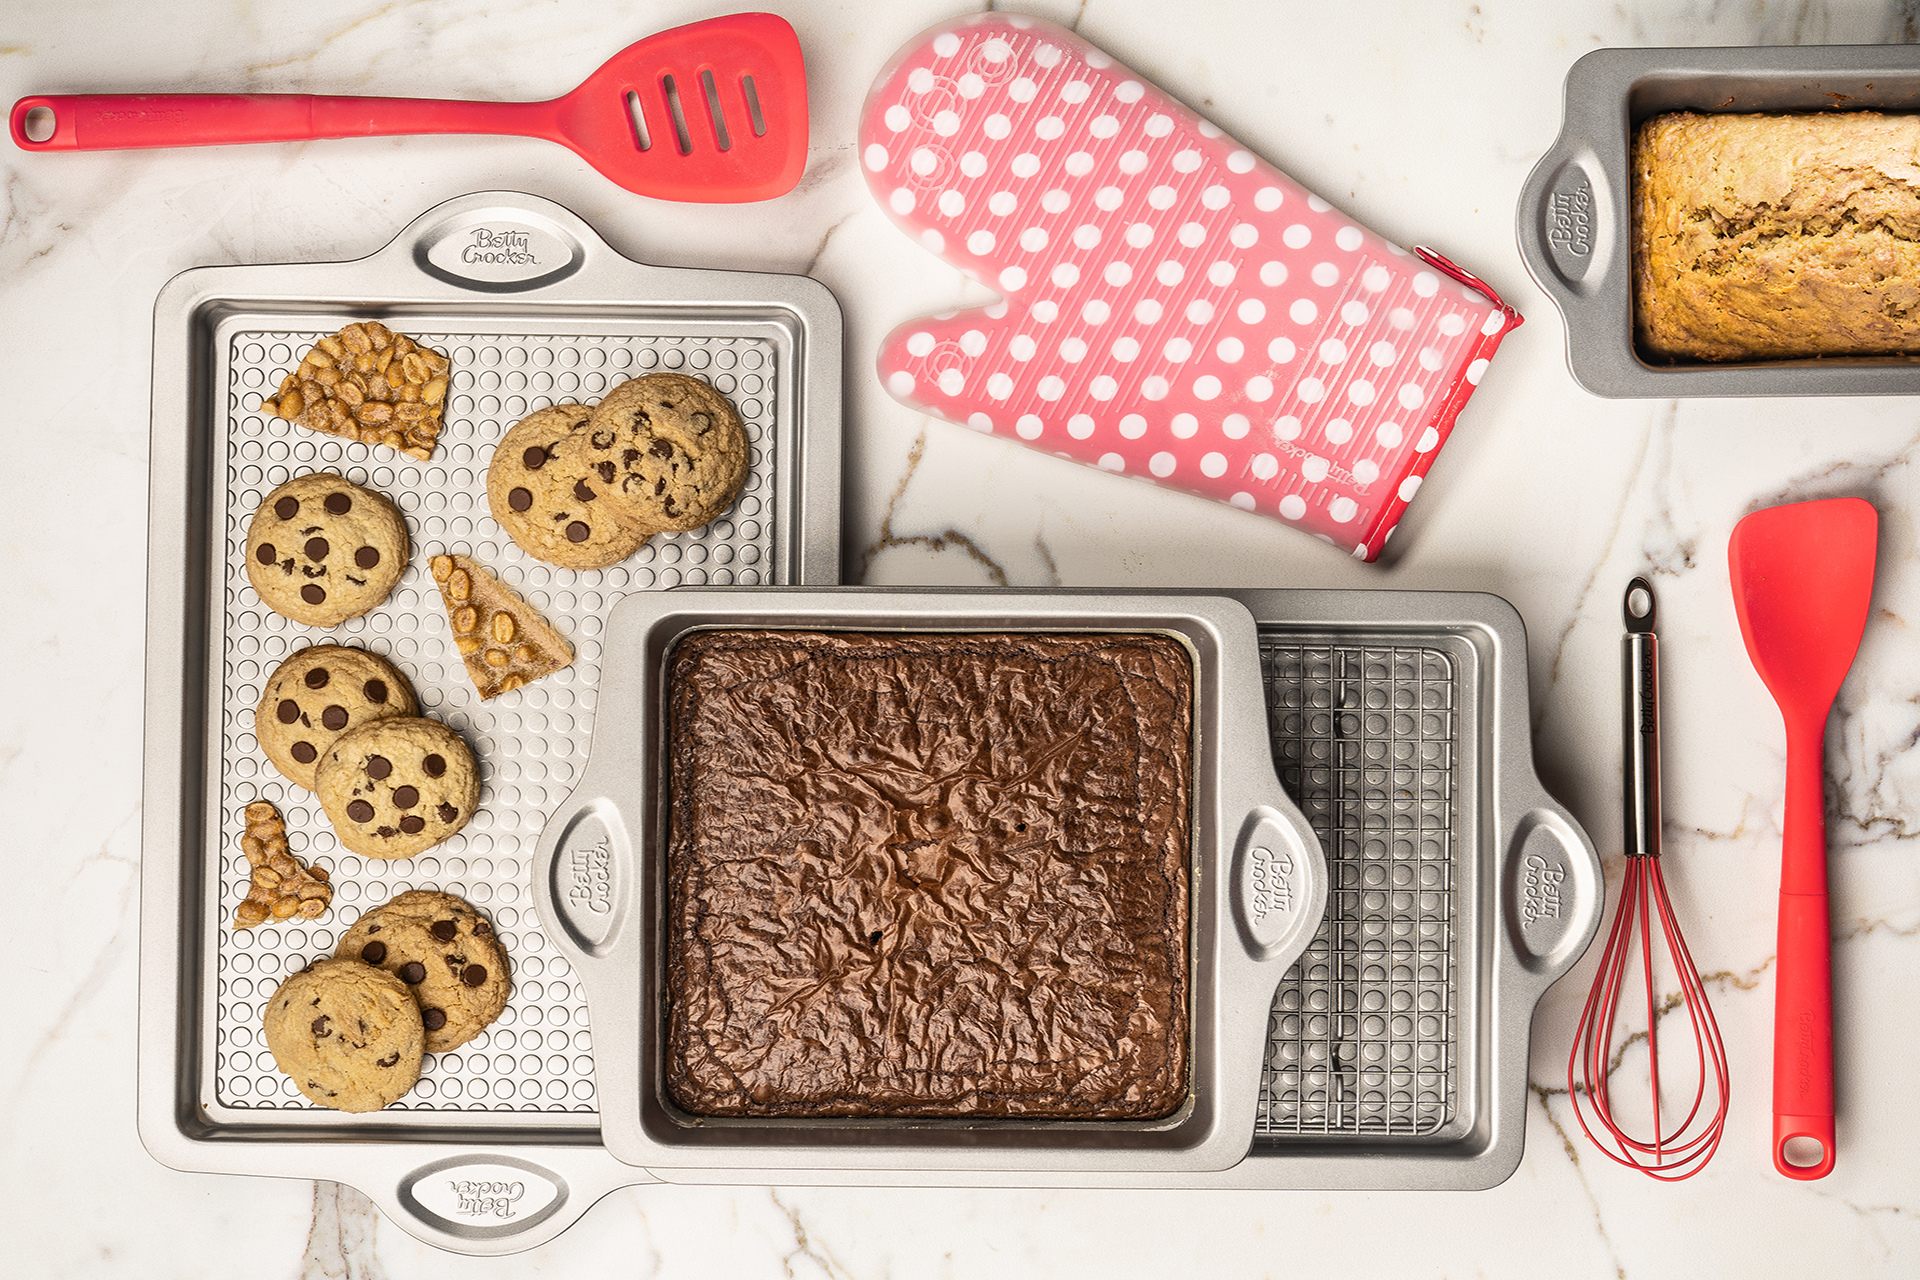 Browne USA To Roll Out Baking Accessories - HomePage News